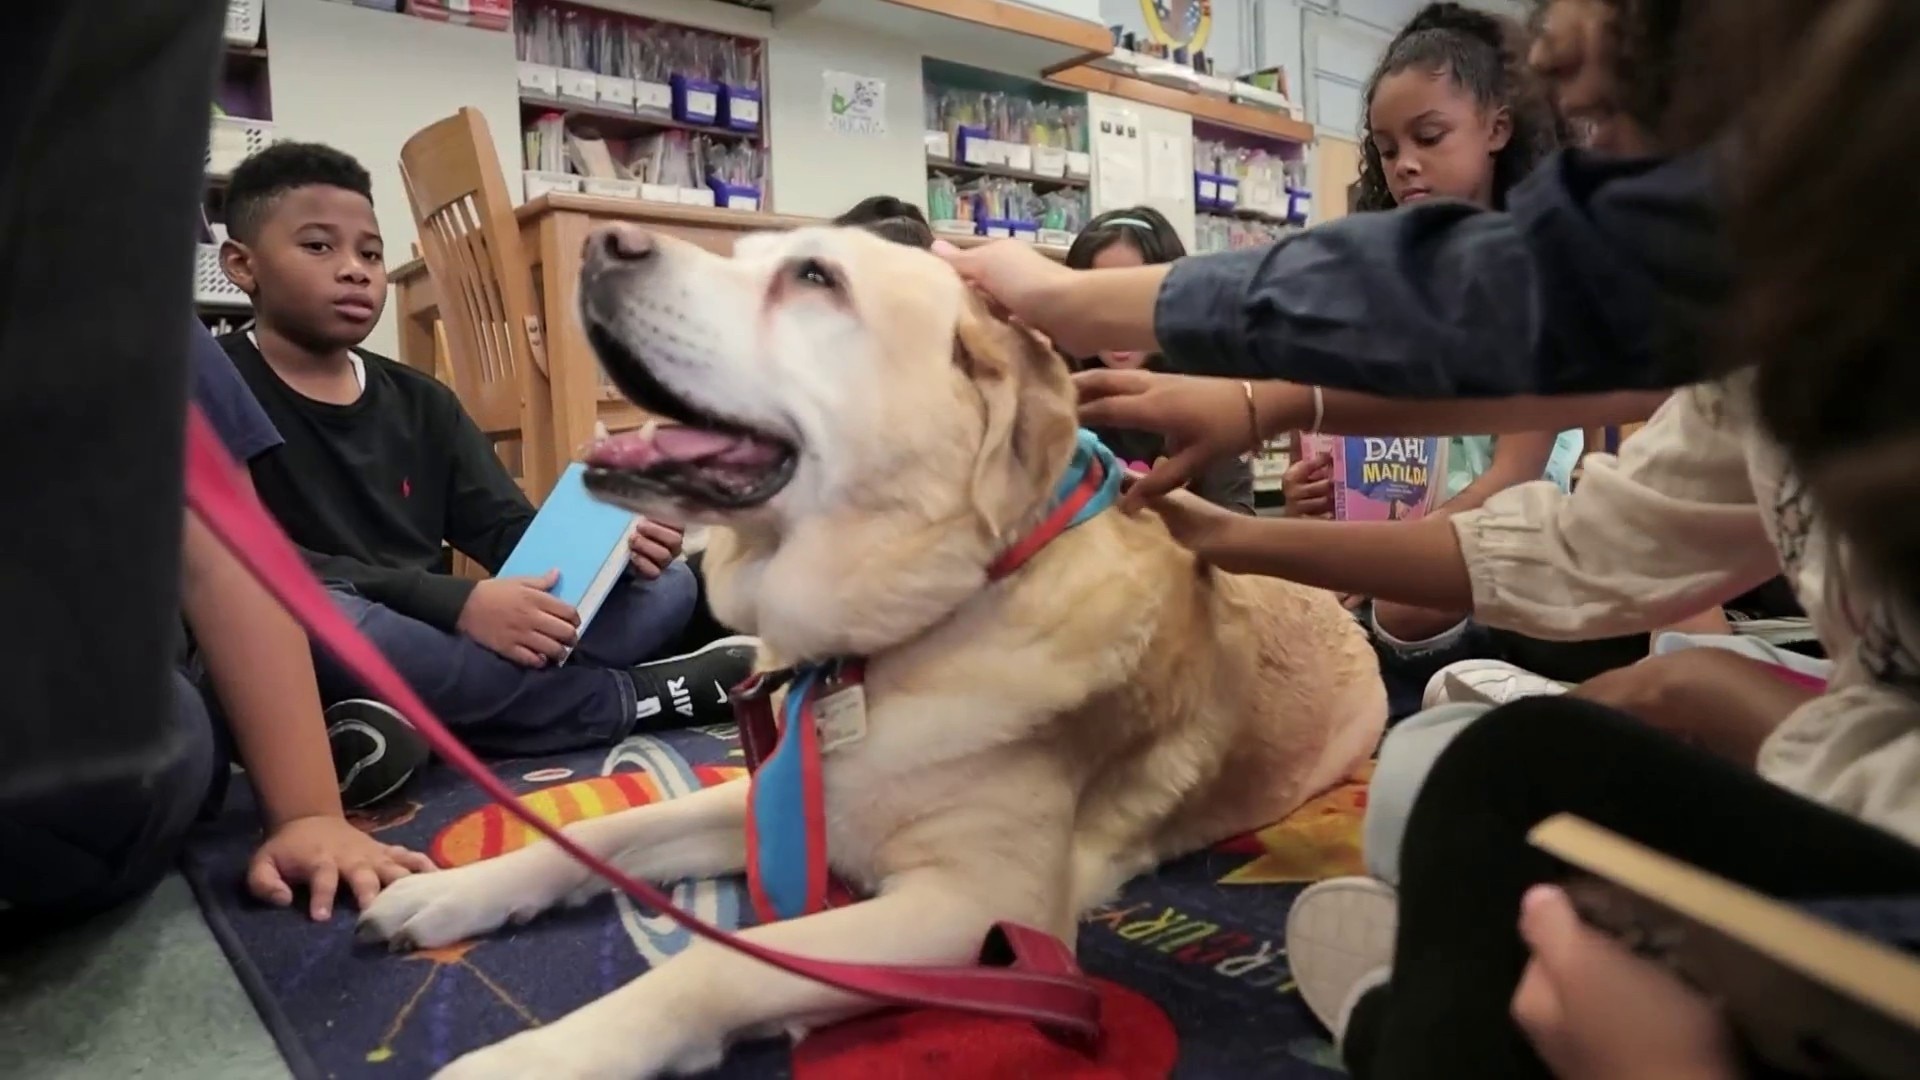 should therapy dogs be allowed in schools